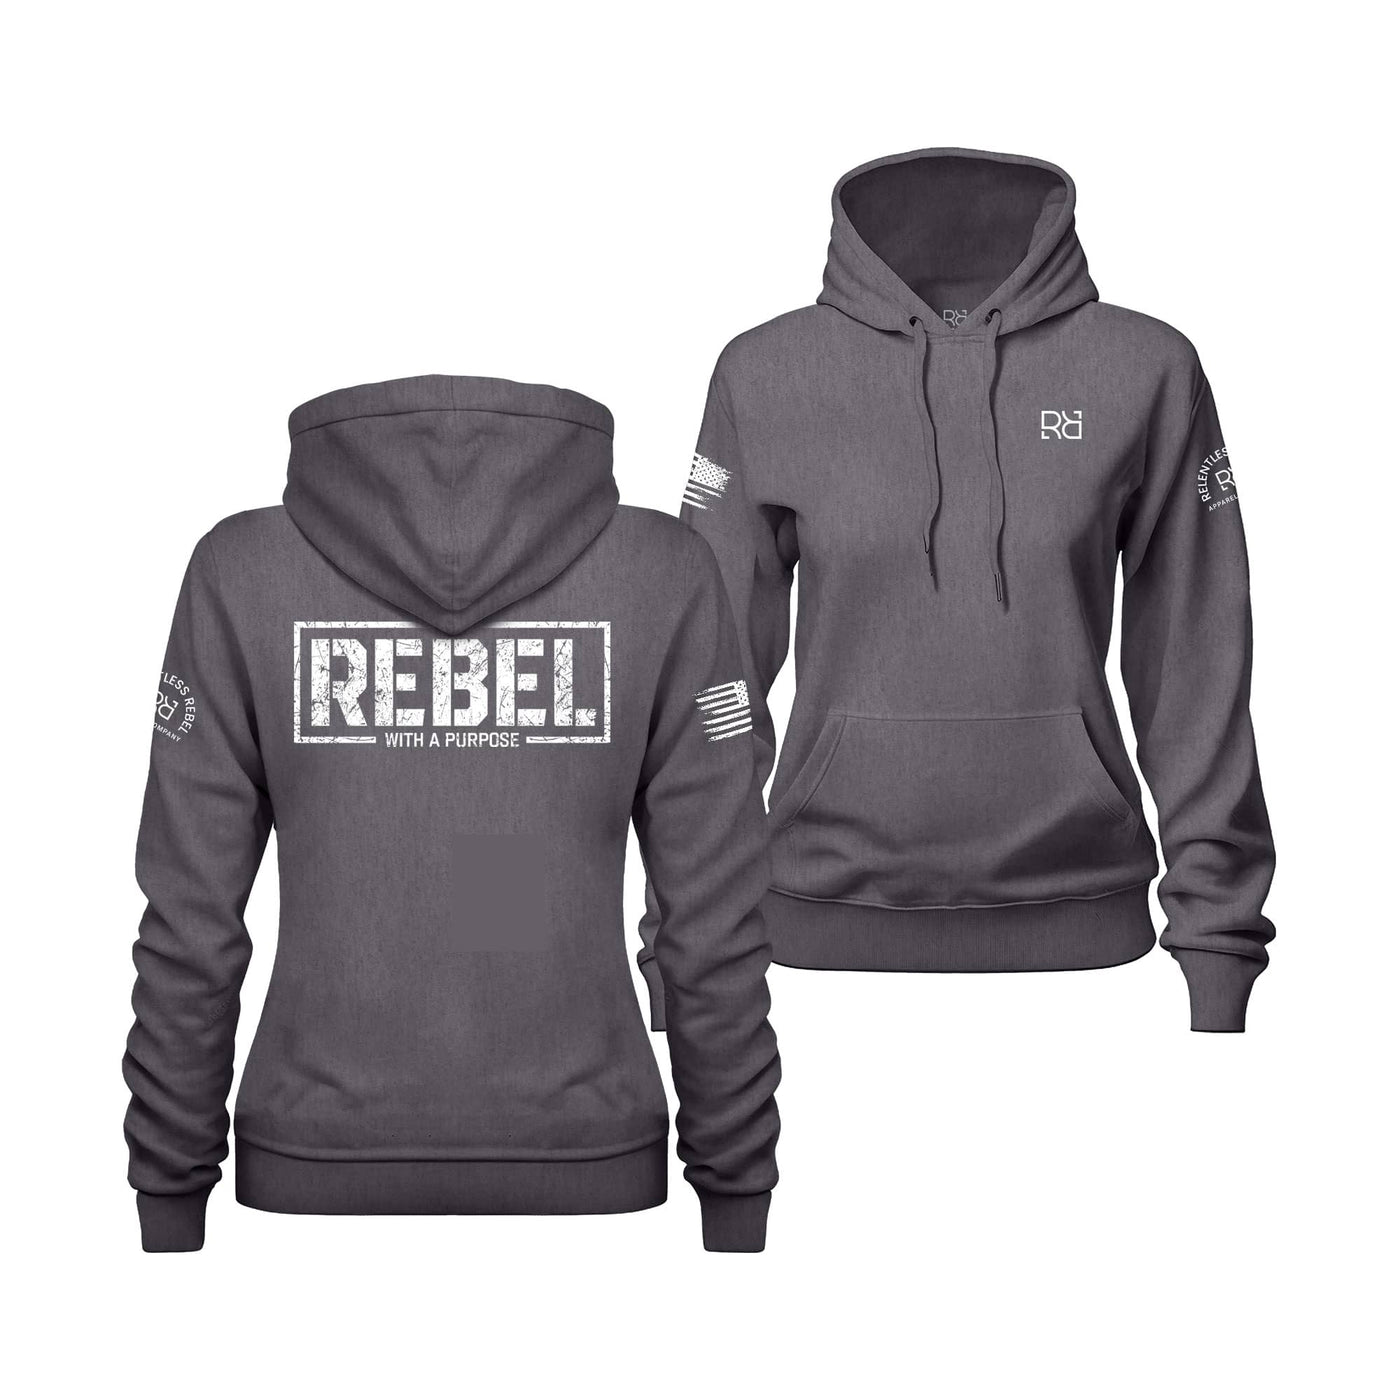 Charcoal Heather Women's Rebel With A Purpose Back Design Hoodie